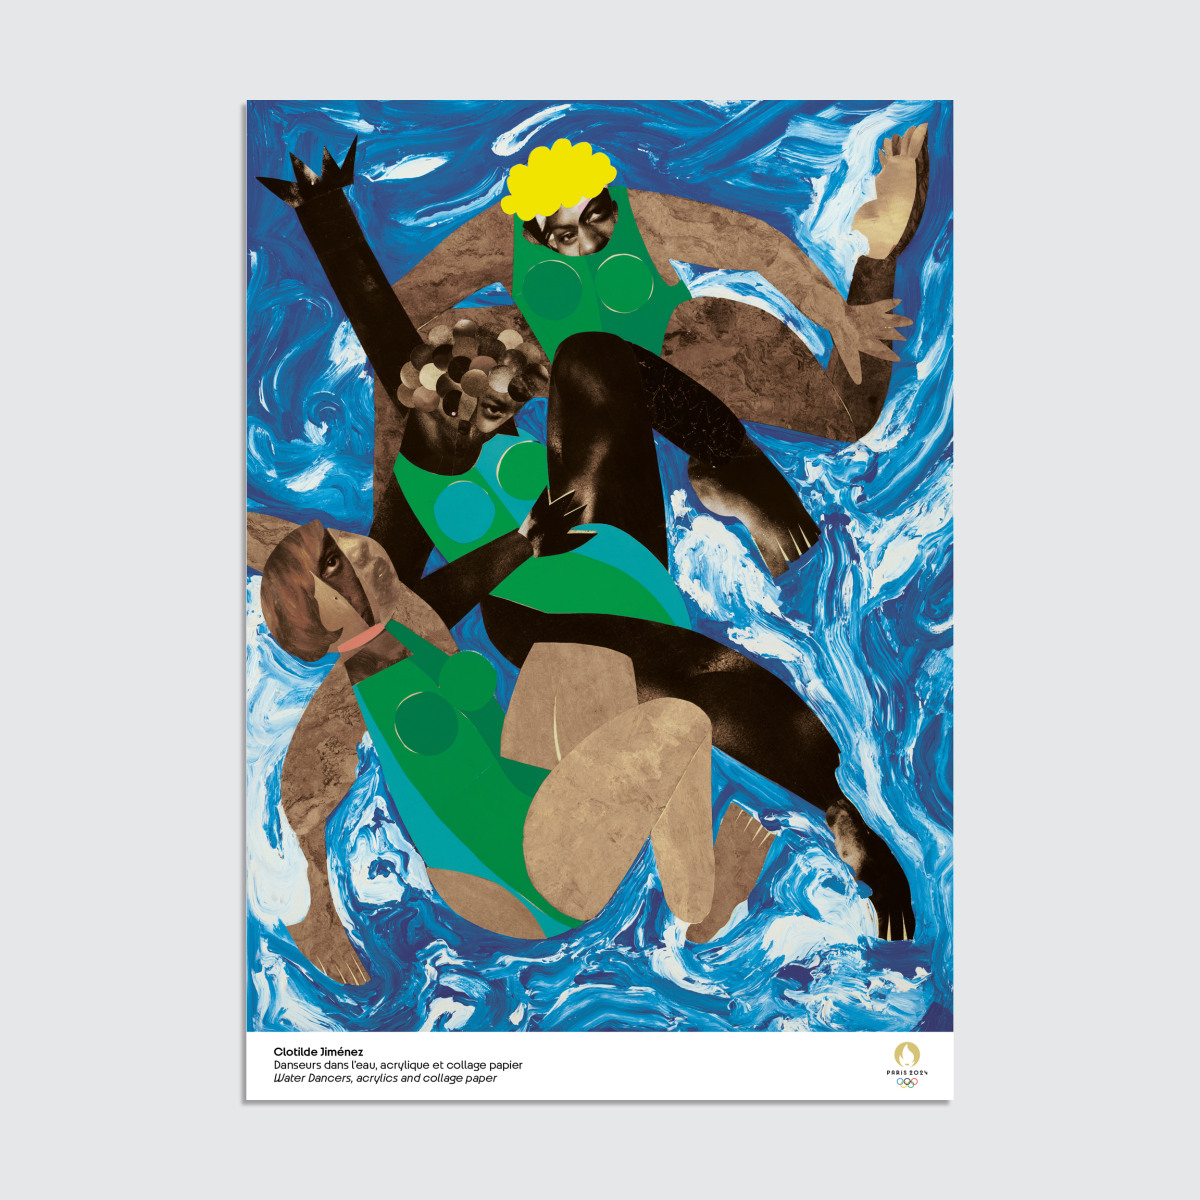 The 2024 Paris Olympic Games posters are here